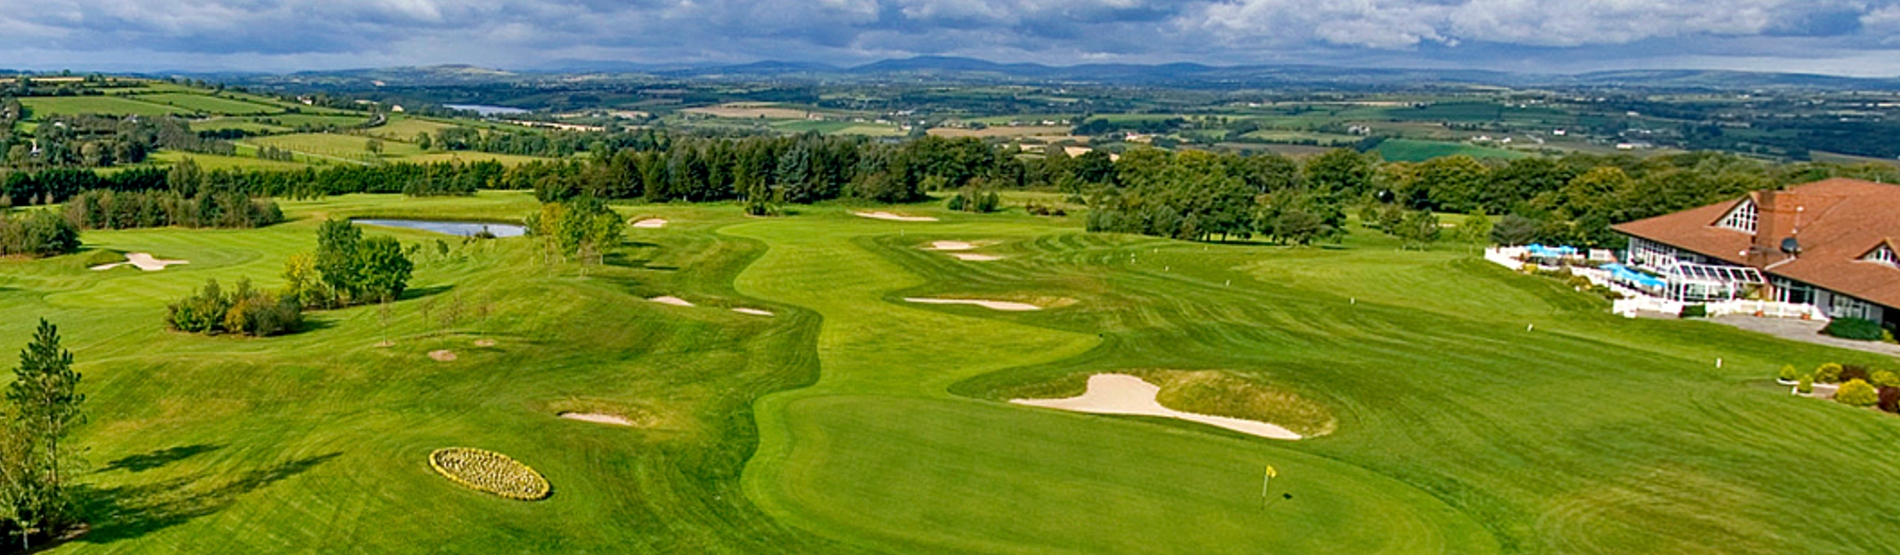 Aerial view of Lee Valley golf course